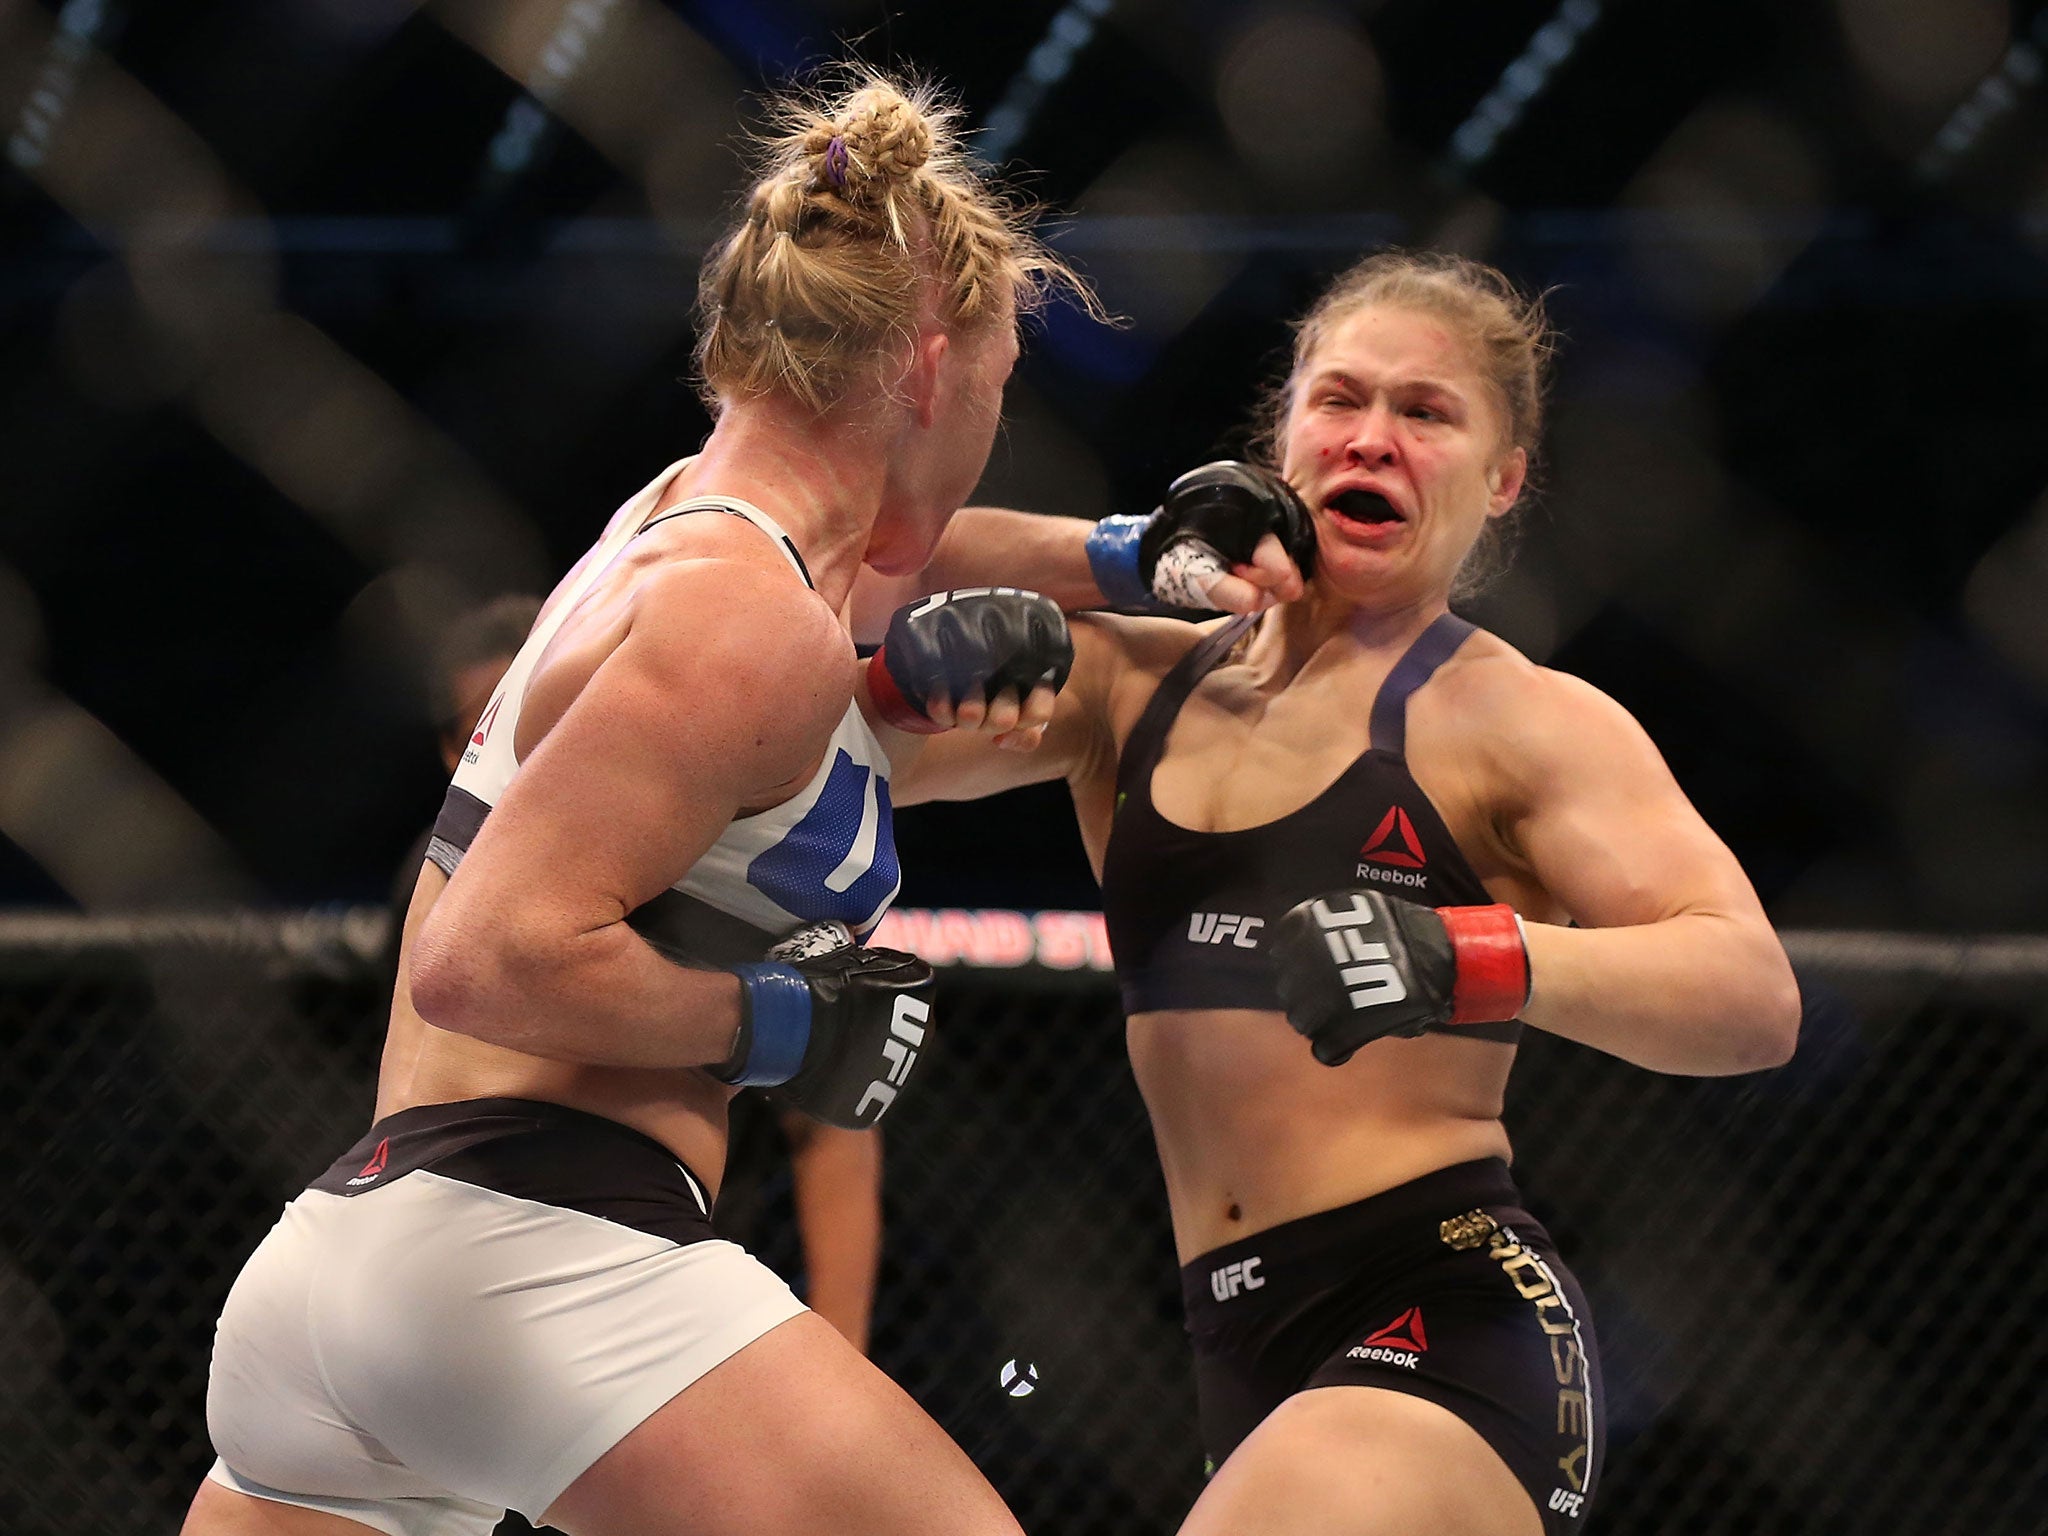 Holly Holm (left) lands a blow on Ronda Rousey